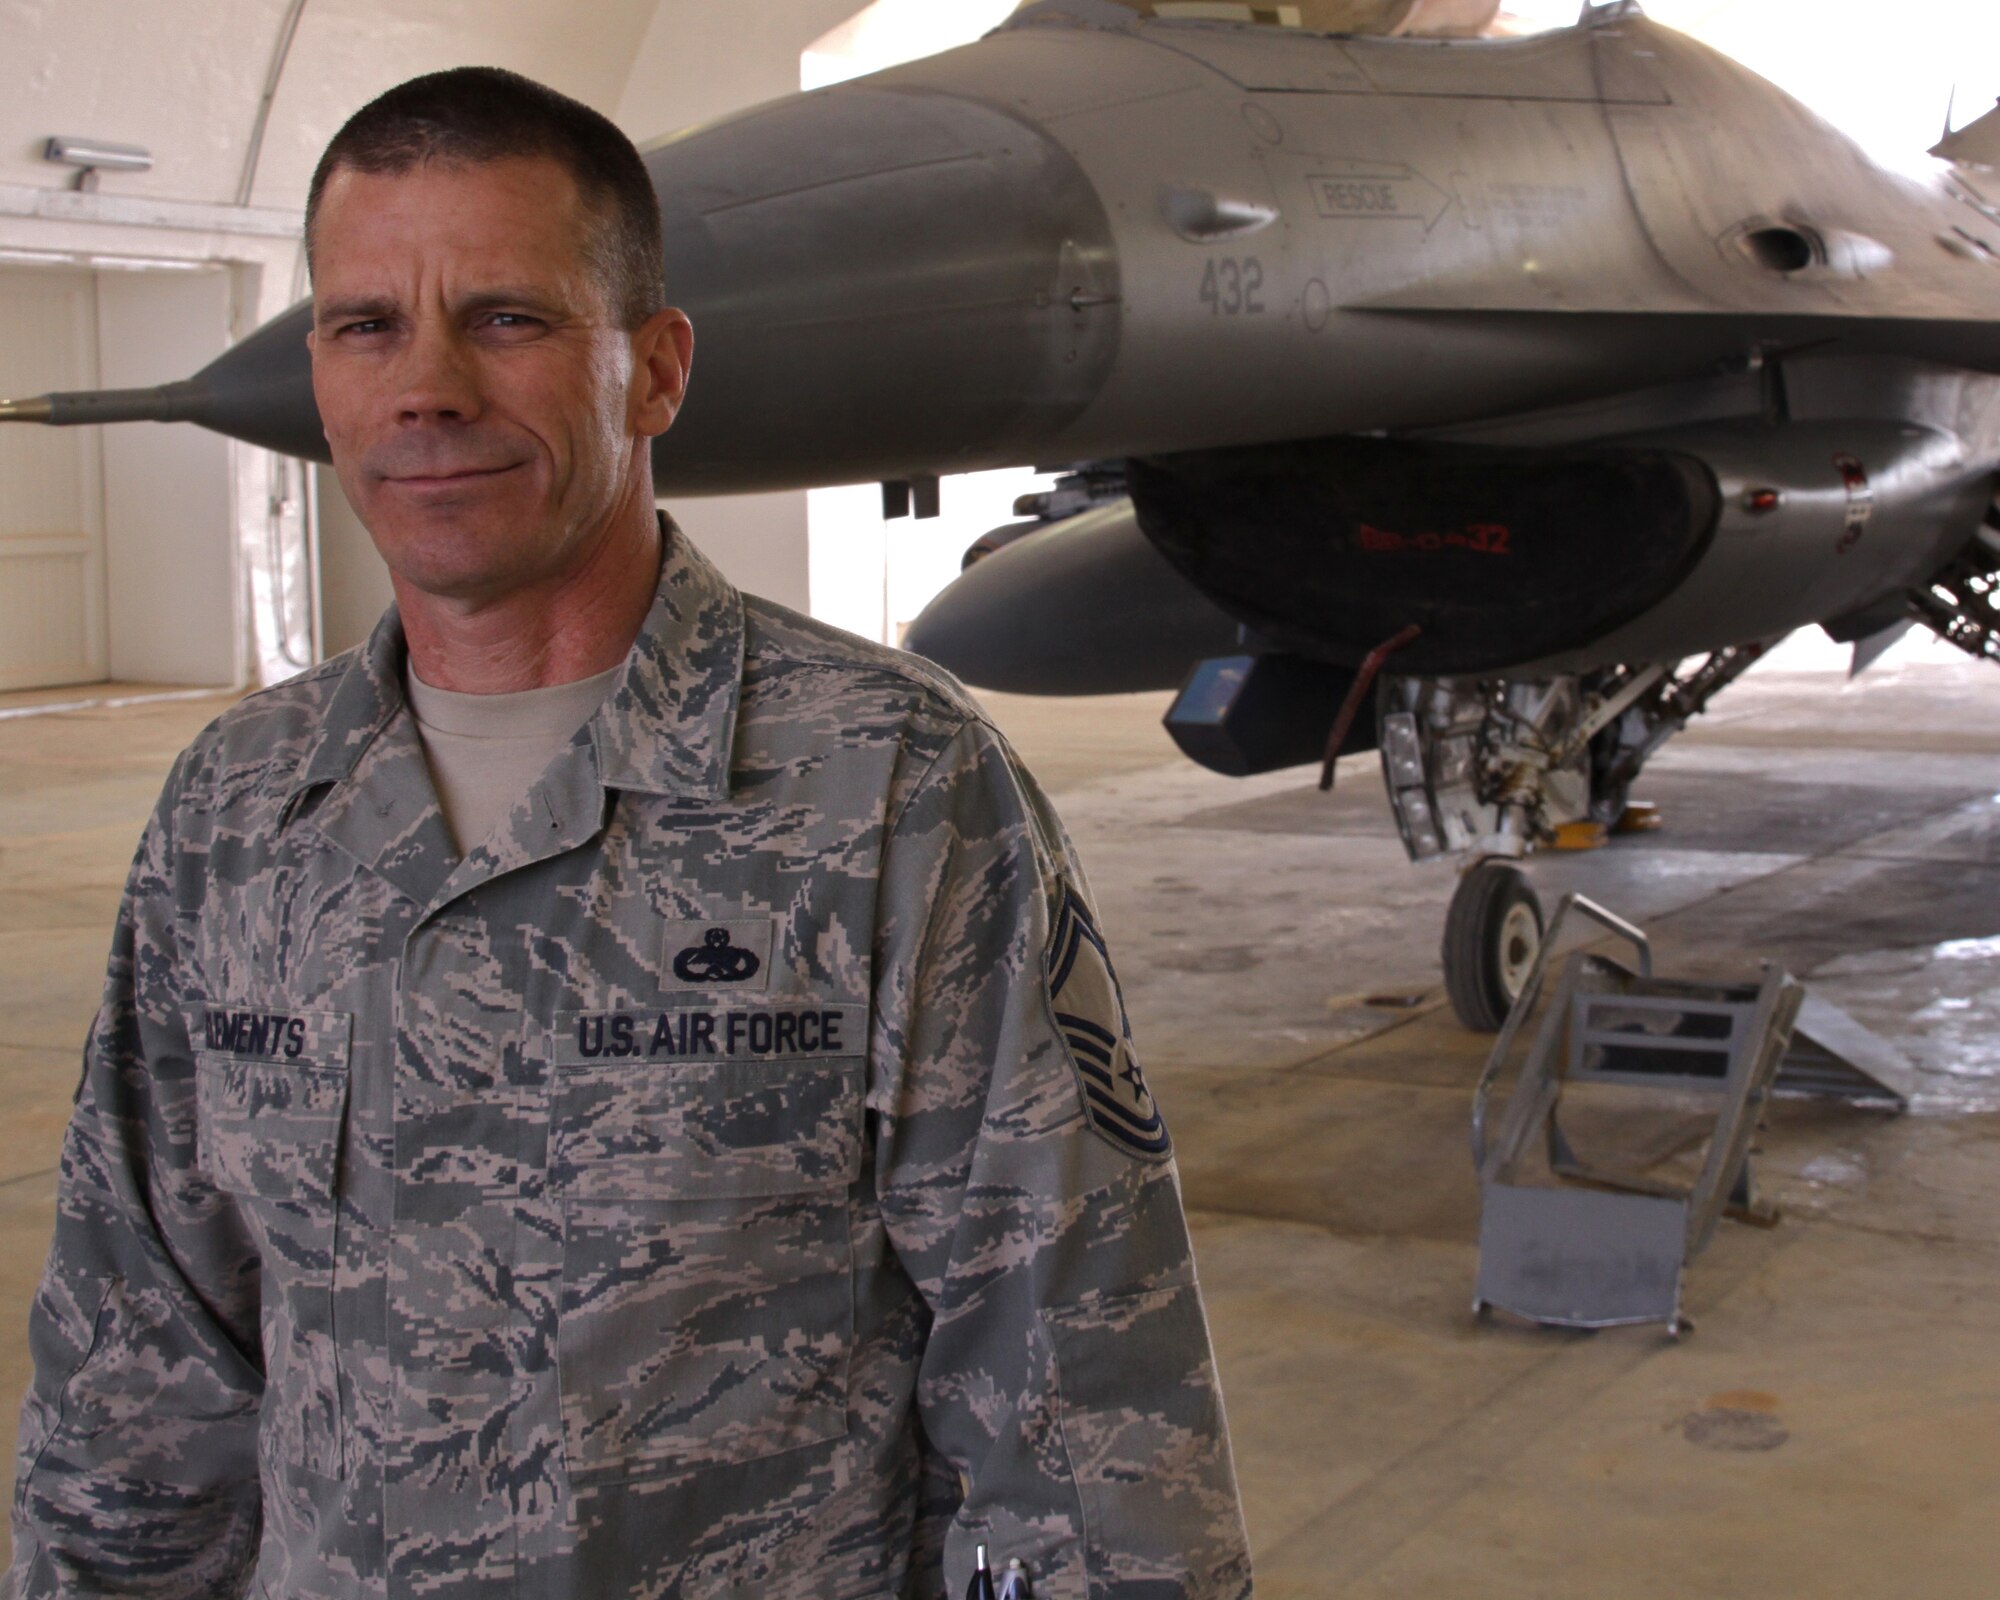 Senior Master Sgt. Scott Clements, 4th Aircraft Maintenance Unit productions supervisor, stands in front of an F-16 Fighting Falcon at Joint Base Balad, Iraq, March 2, 2009. Sergeant Clements was in an accident four years ago, which resulted in a below-the-knee amputation on his left leg. He uses a prosthetic leg, but it does not stop him from being the fight. (U.S. Air Force photo/Tech. Sgt. Lionel Castellano)